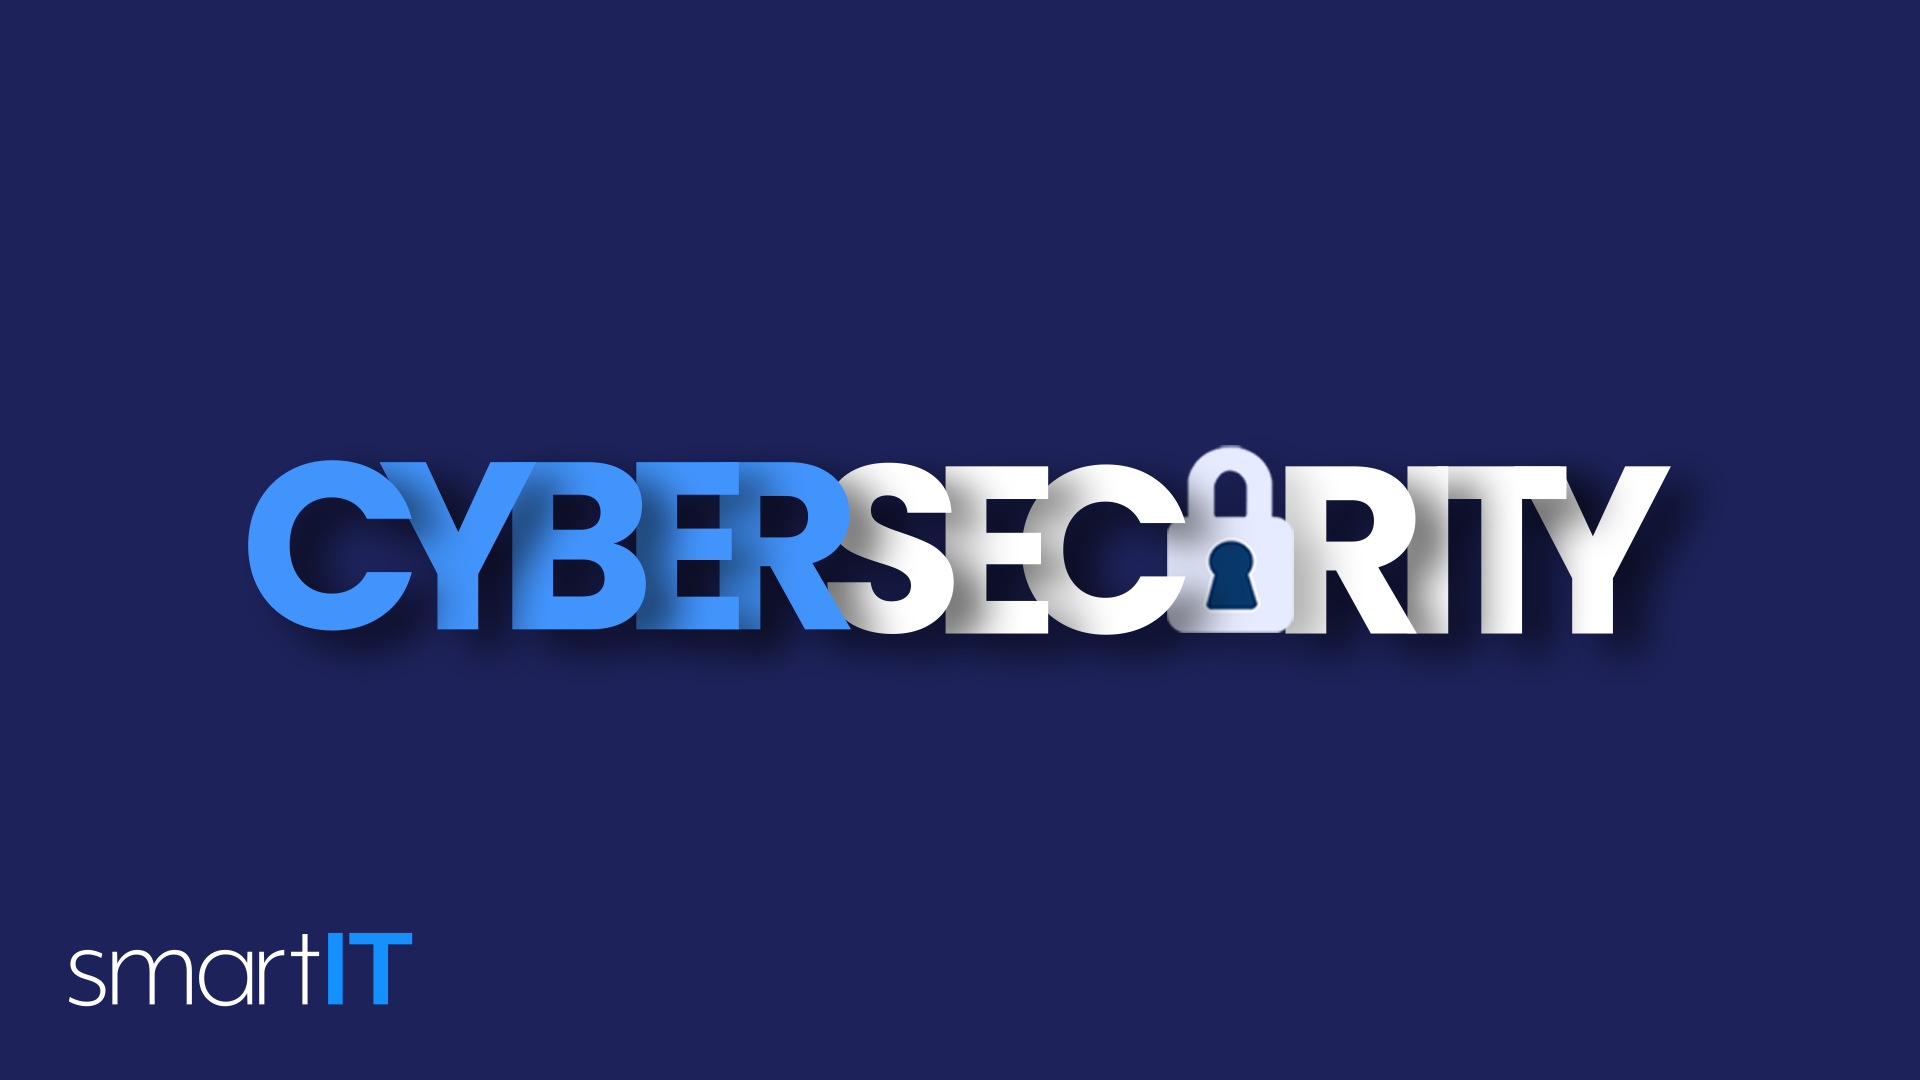 graphic with the word cybersecurity on it. navy blue background